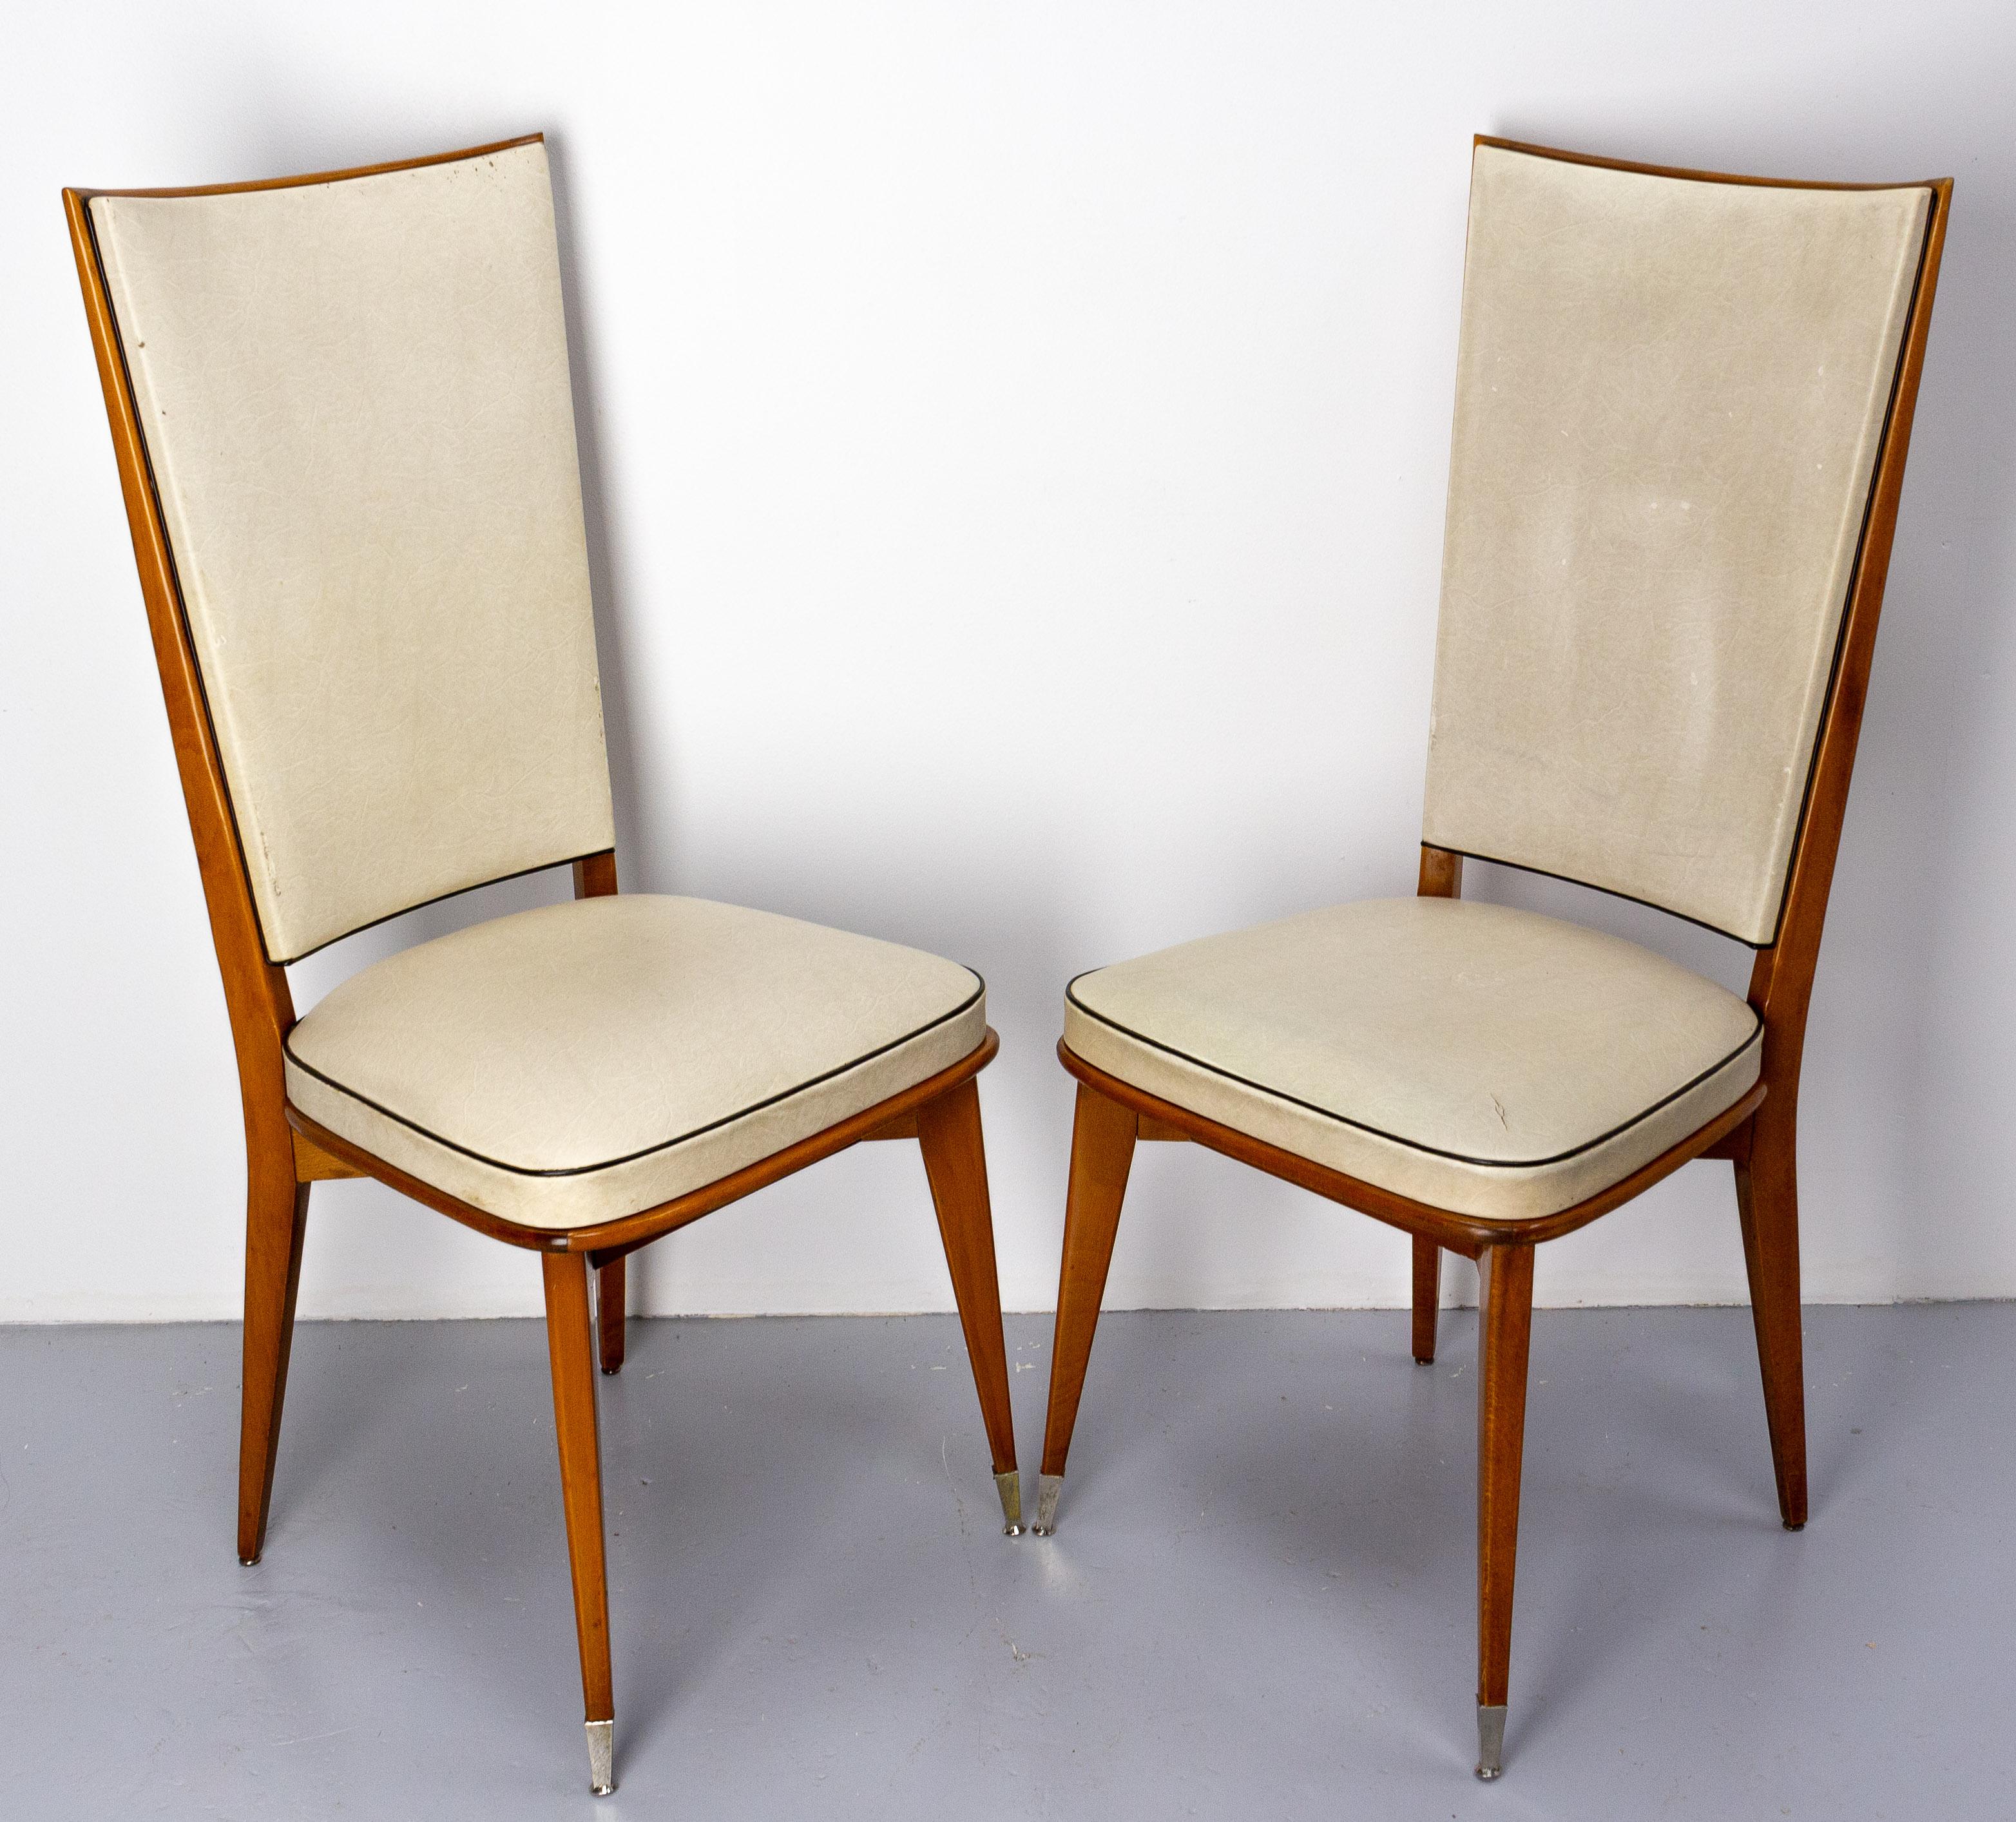 20th Century Six Dining Chairs Beech and Skai to Recover Midcentury French, circa 1950 For Sale